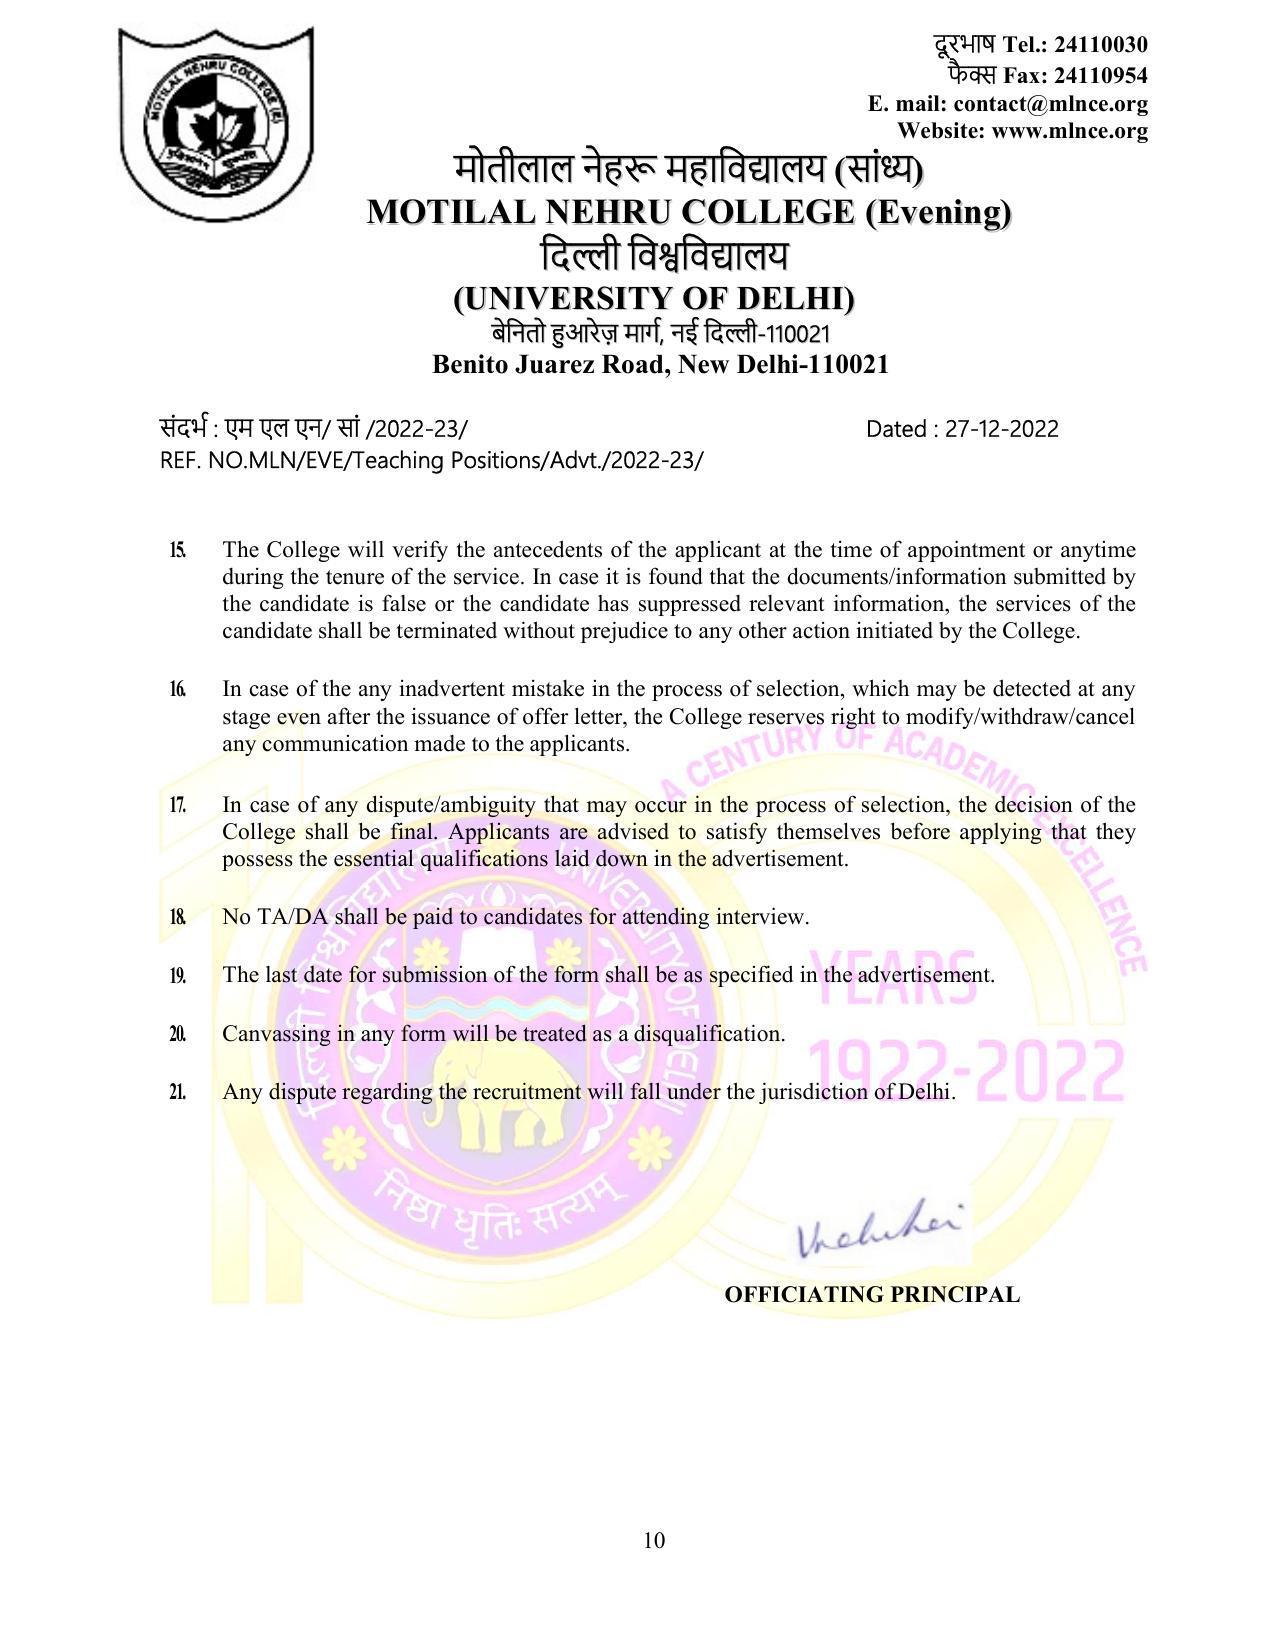 Motilal Nehru College (Evening) Invites Application for 75 Assistant Professor Recruitment 2022 - Page 5